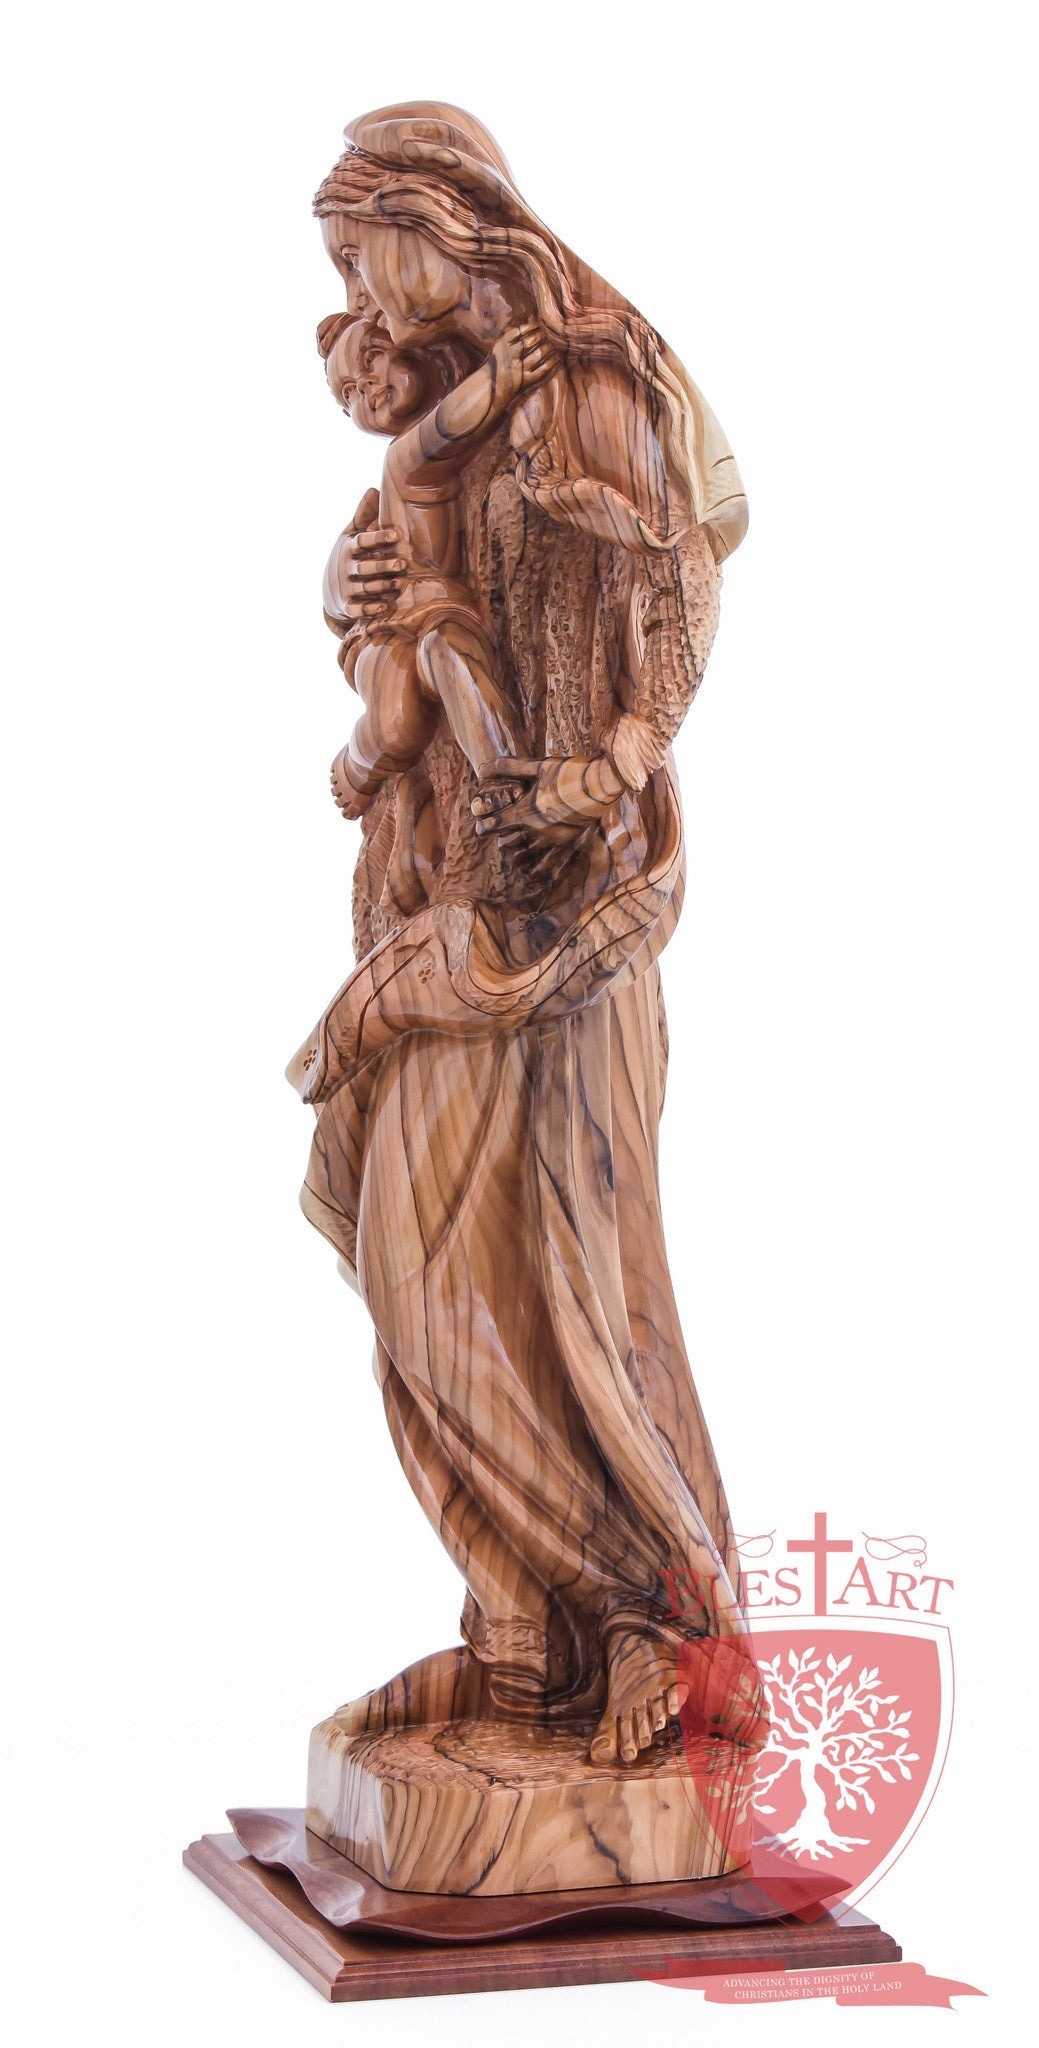 The Bavarian Madonna and Child, Available in different sizes.